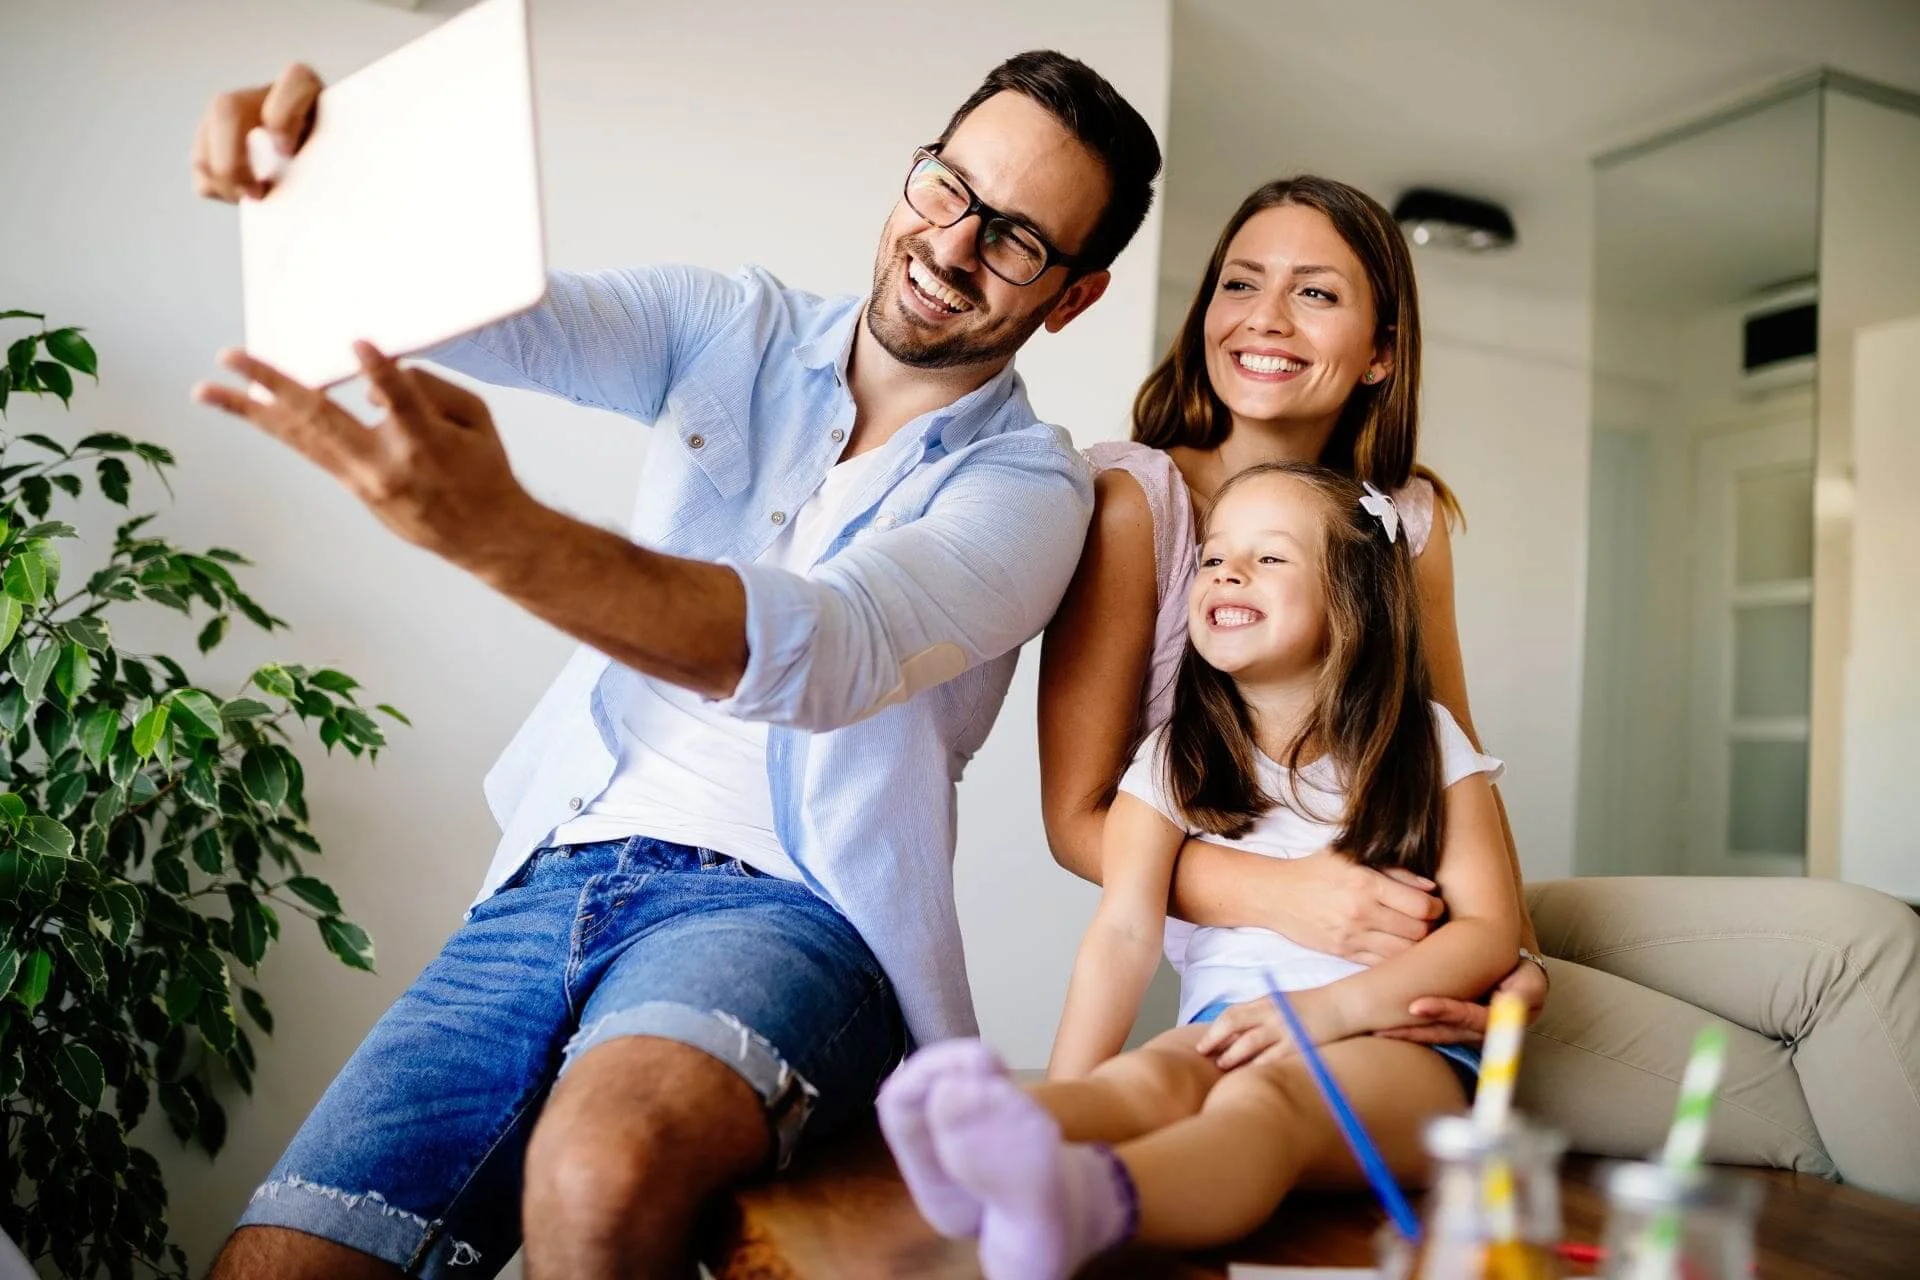 How Digitalization Is Giving Families More Time Together